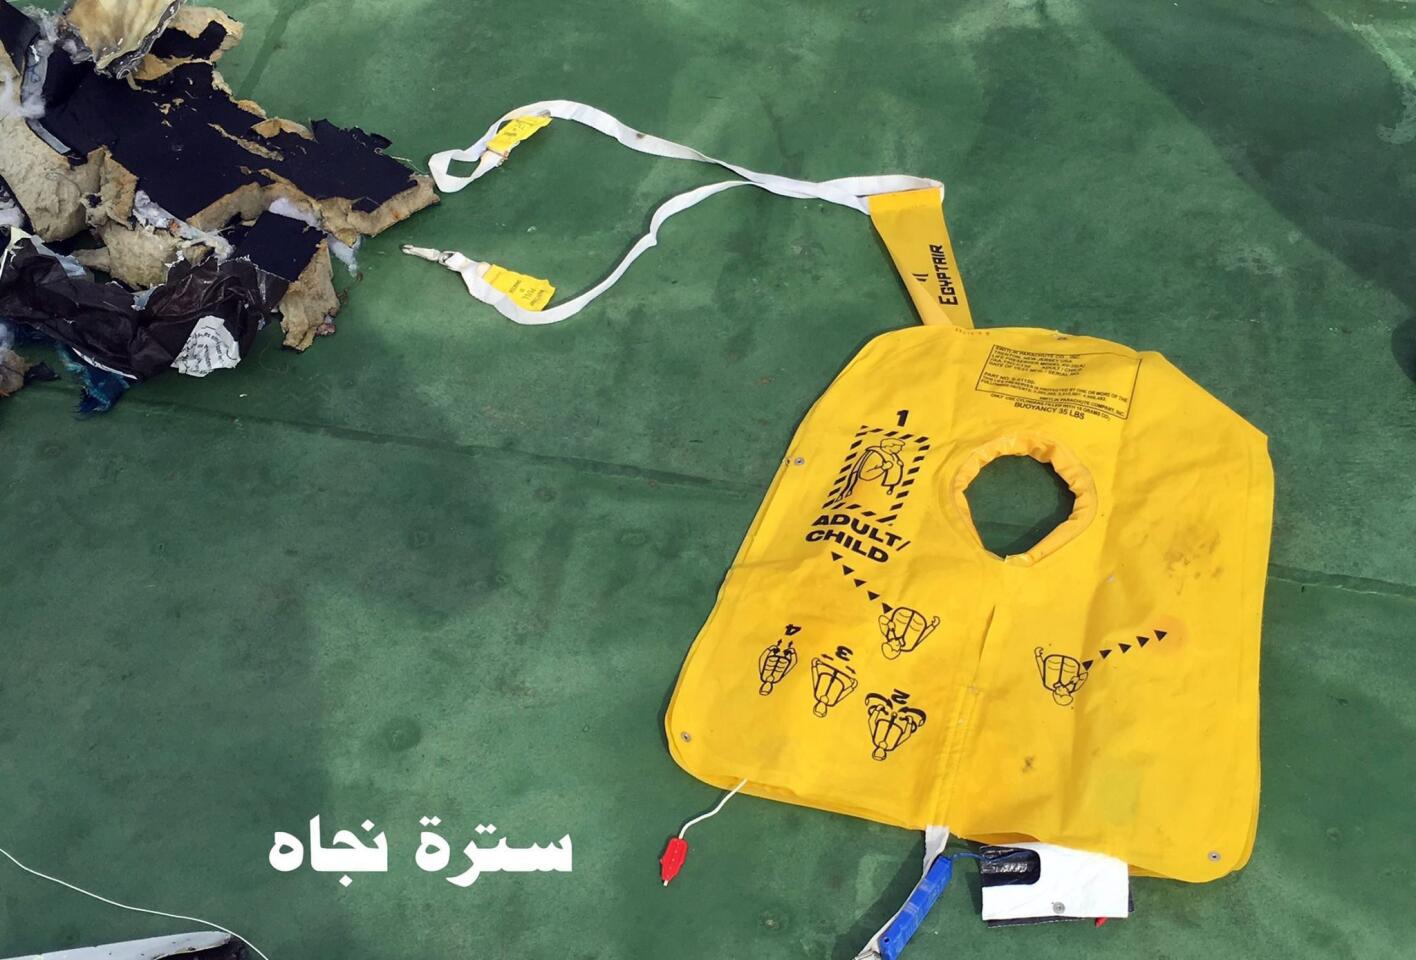 A handout picture made available by the Egyptian Defense Ministry shows a life jacket from EgyptAir Flight 804.